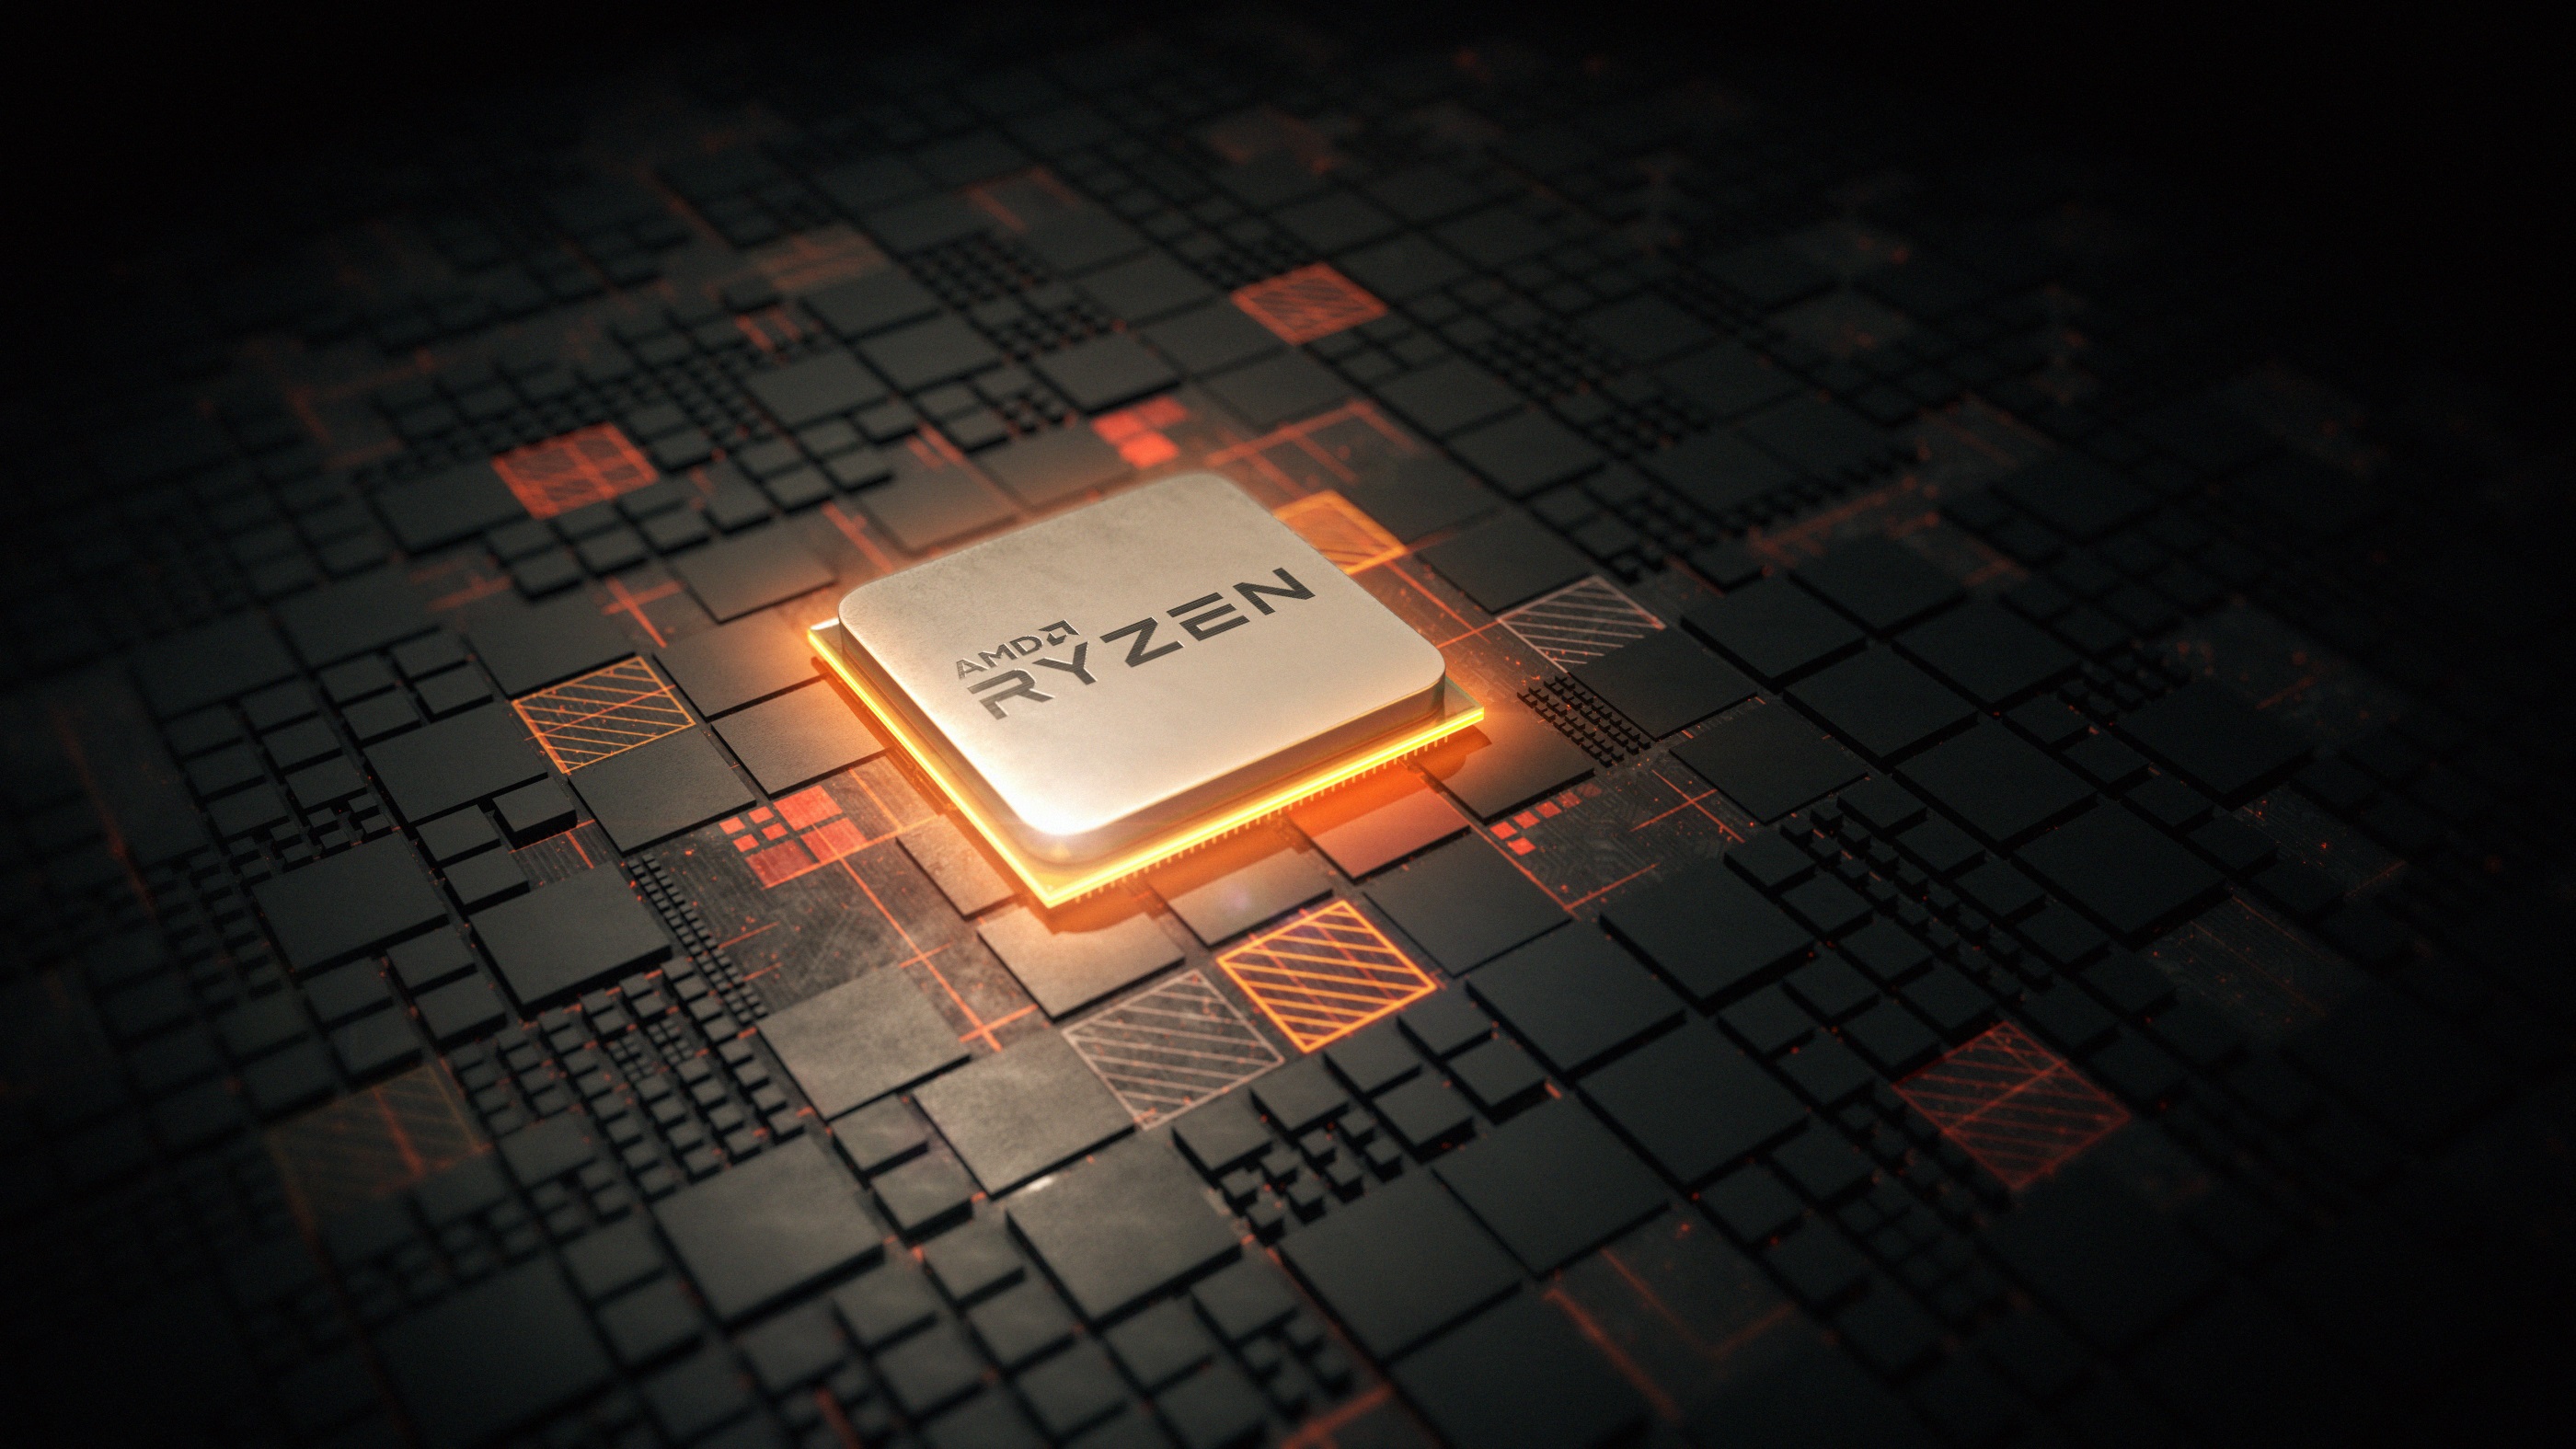 Amd S Gpu Drivers Are Overclocking Some Ryzen Processors Without Asking Ars Technica